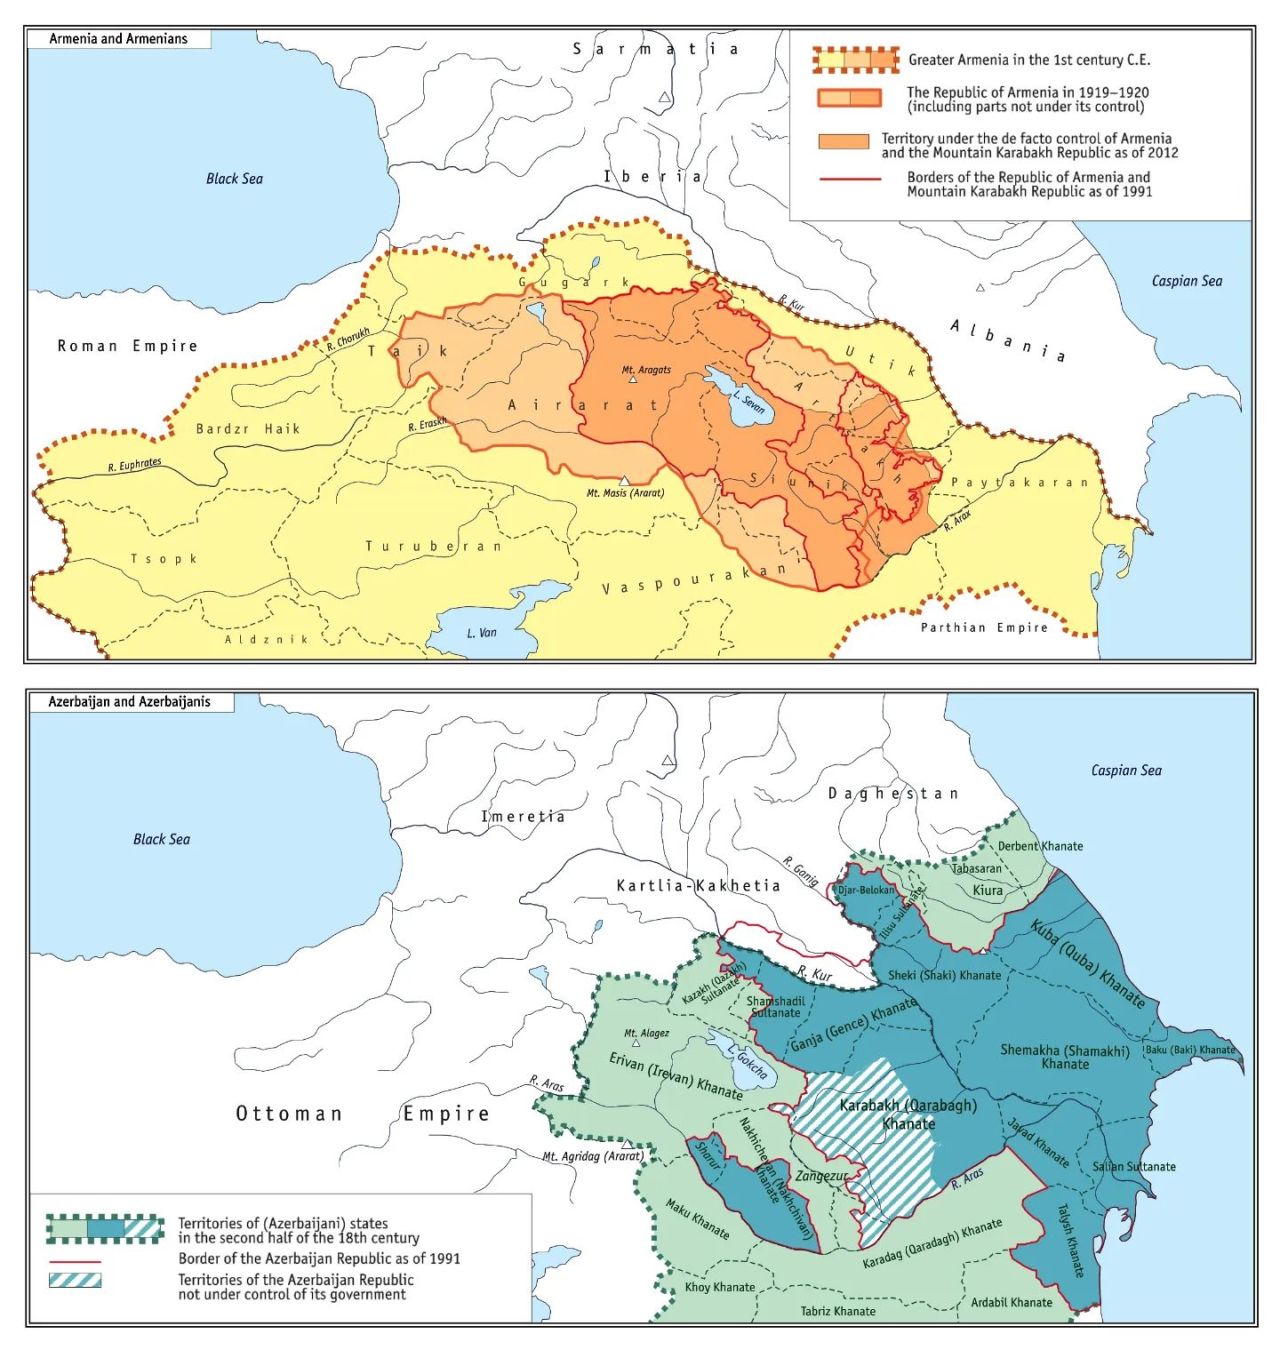 The territorial history of Armenia and Azerbaijan
“Atlas of the Ethno-Political History of the Caucasus”, Arthur Tsutsiev, Yale University Press, 2014
The Armenian historical view centers on the global threat associated with the expansion of...